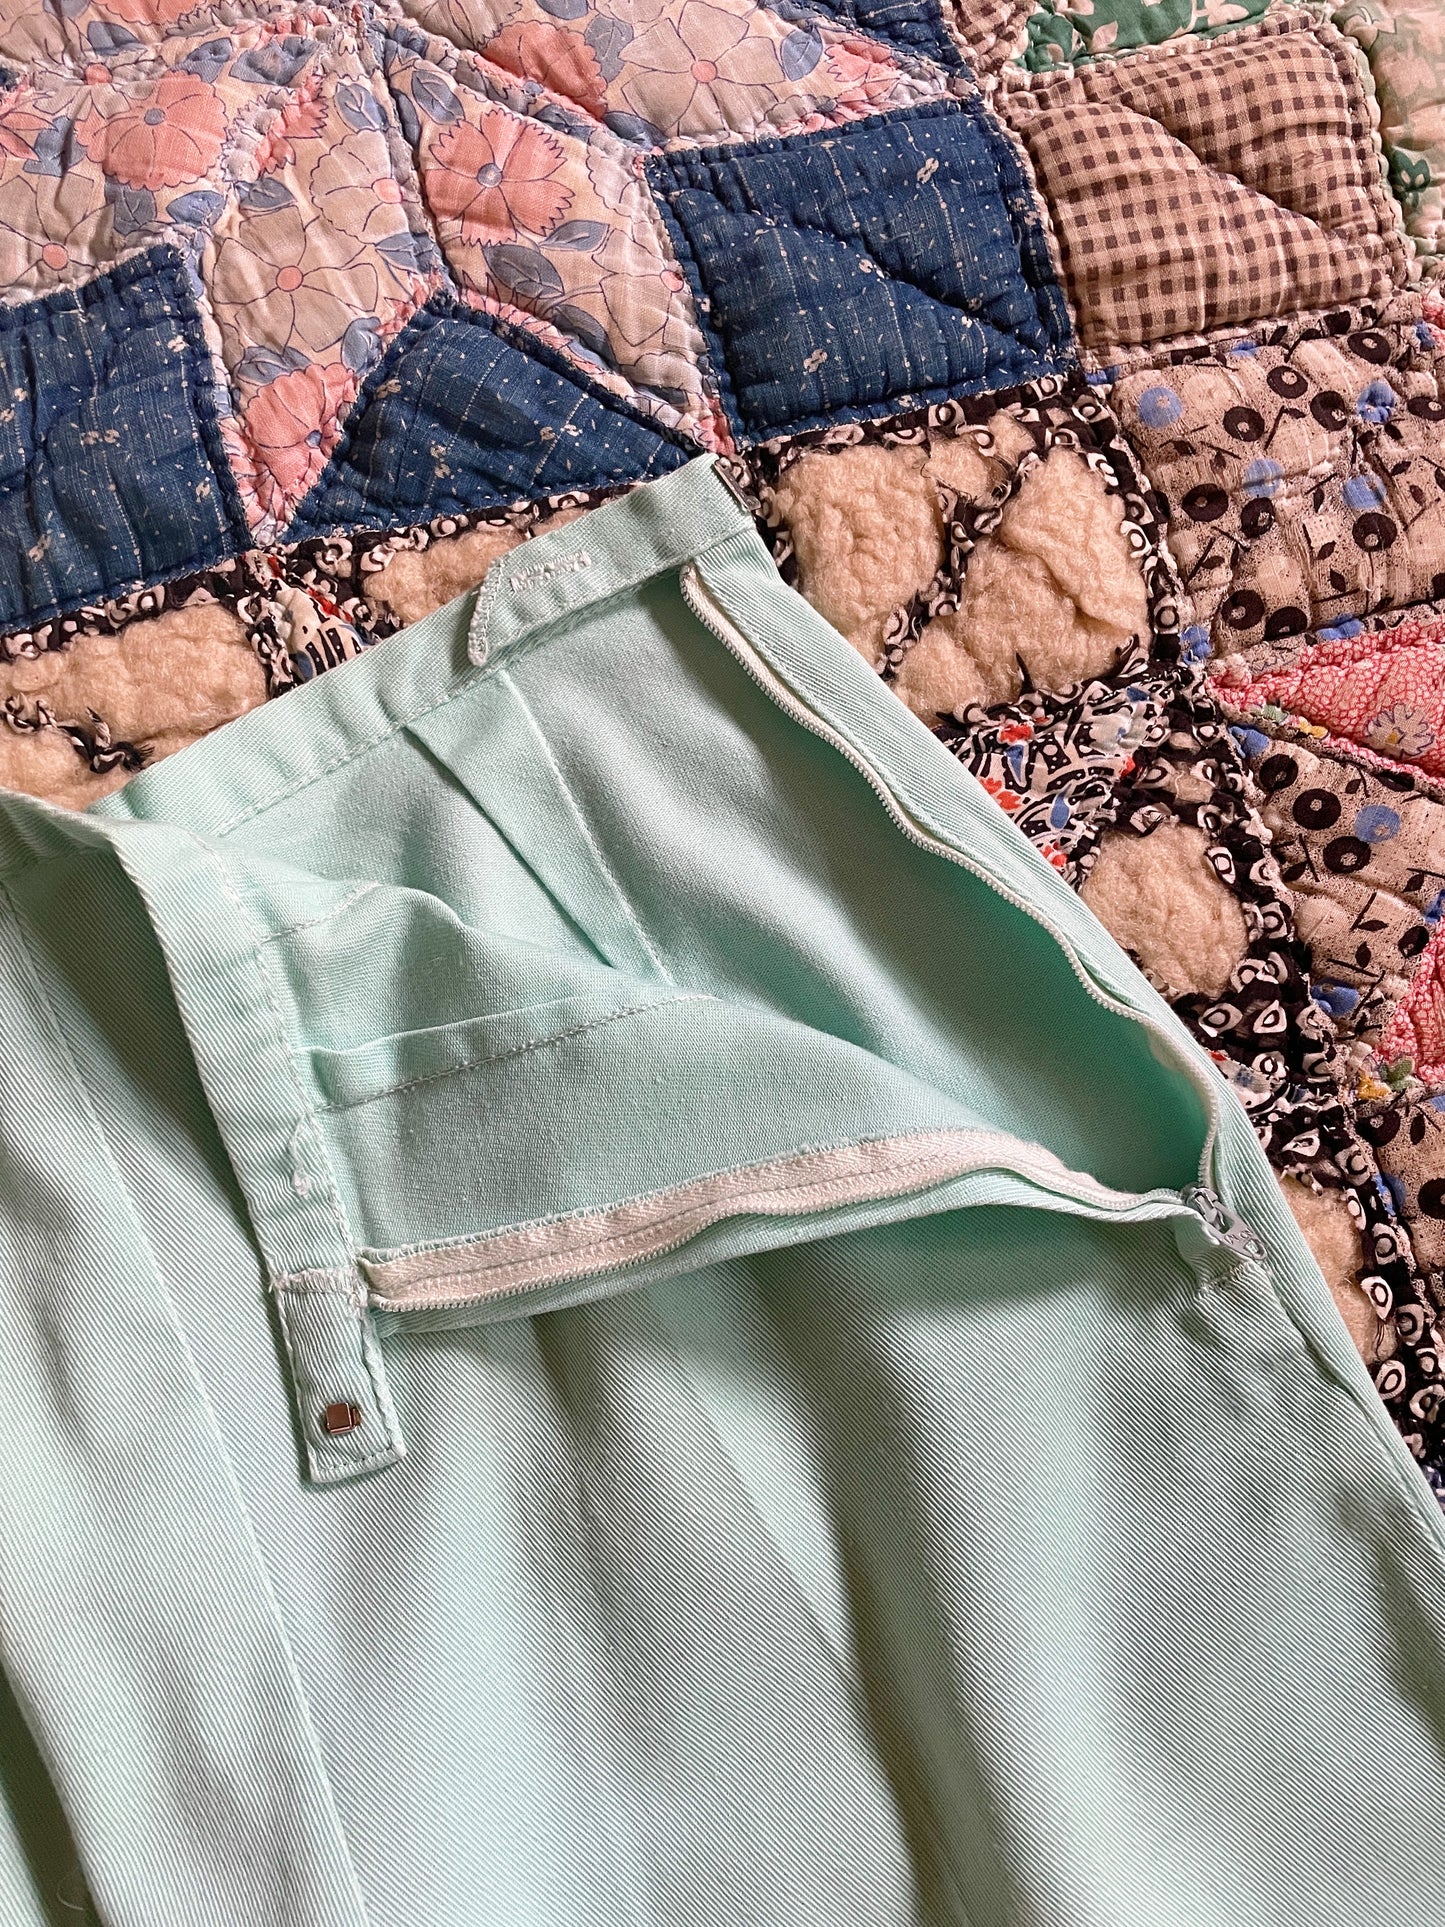 1960s Mint Green White Stag Sailcloth Jacket and Pants Set